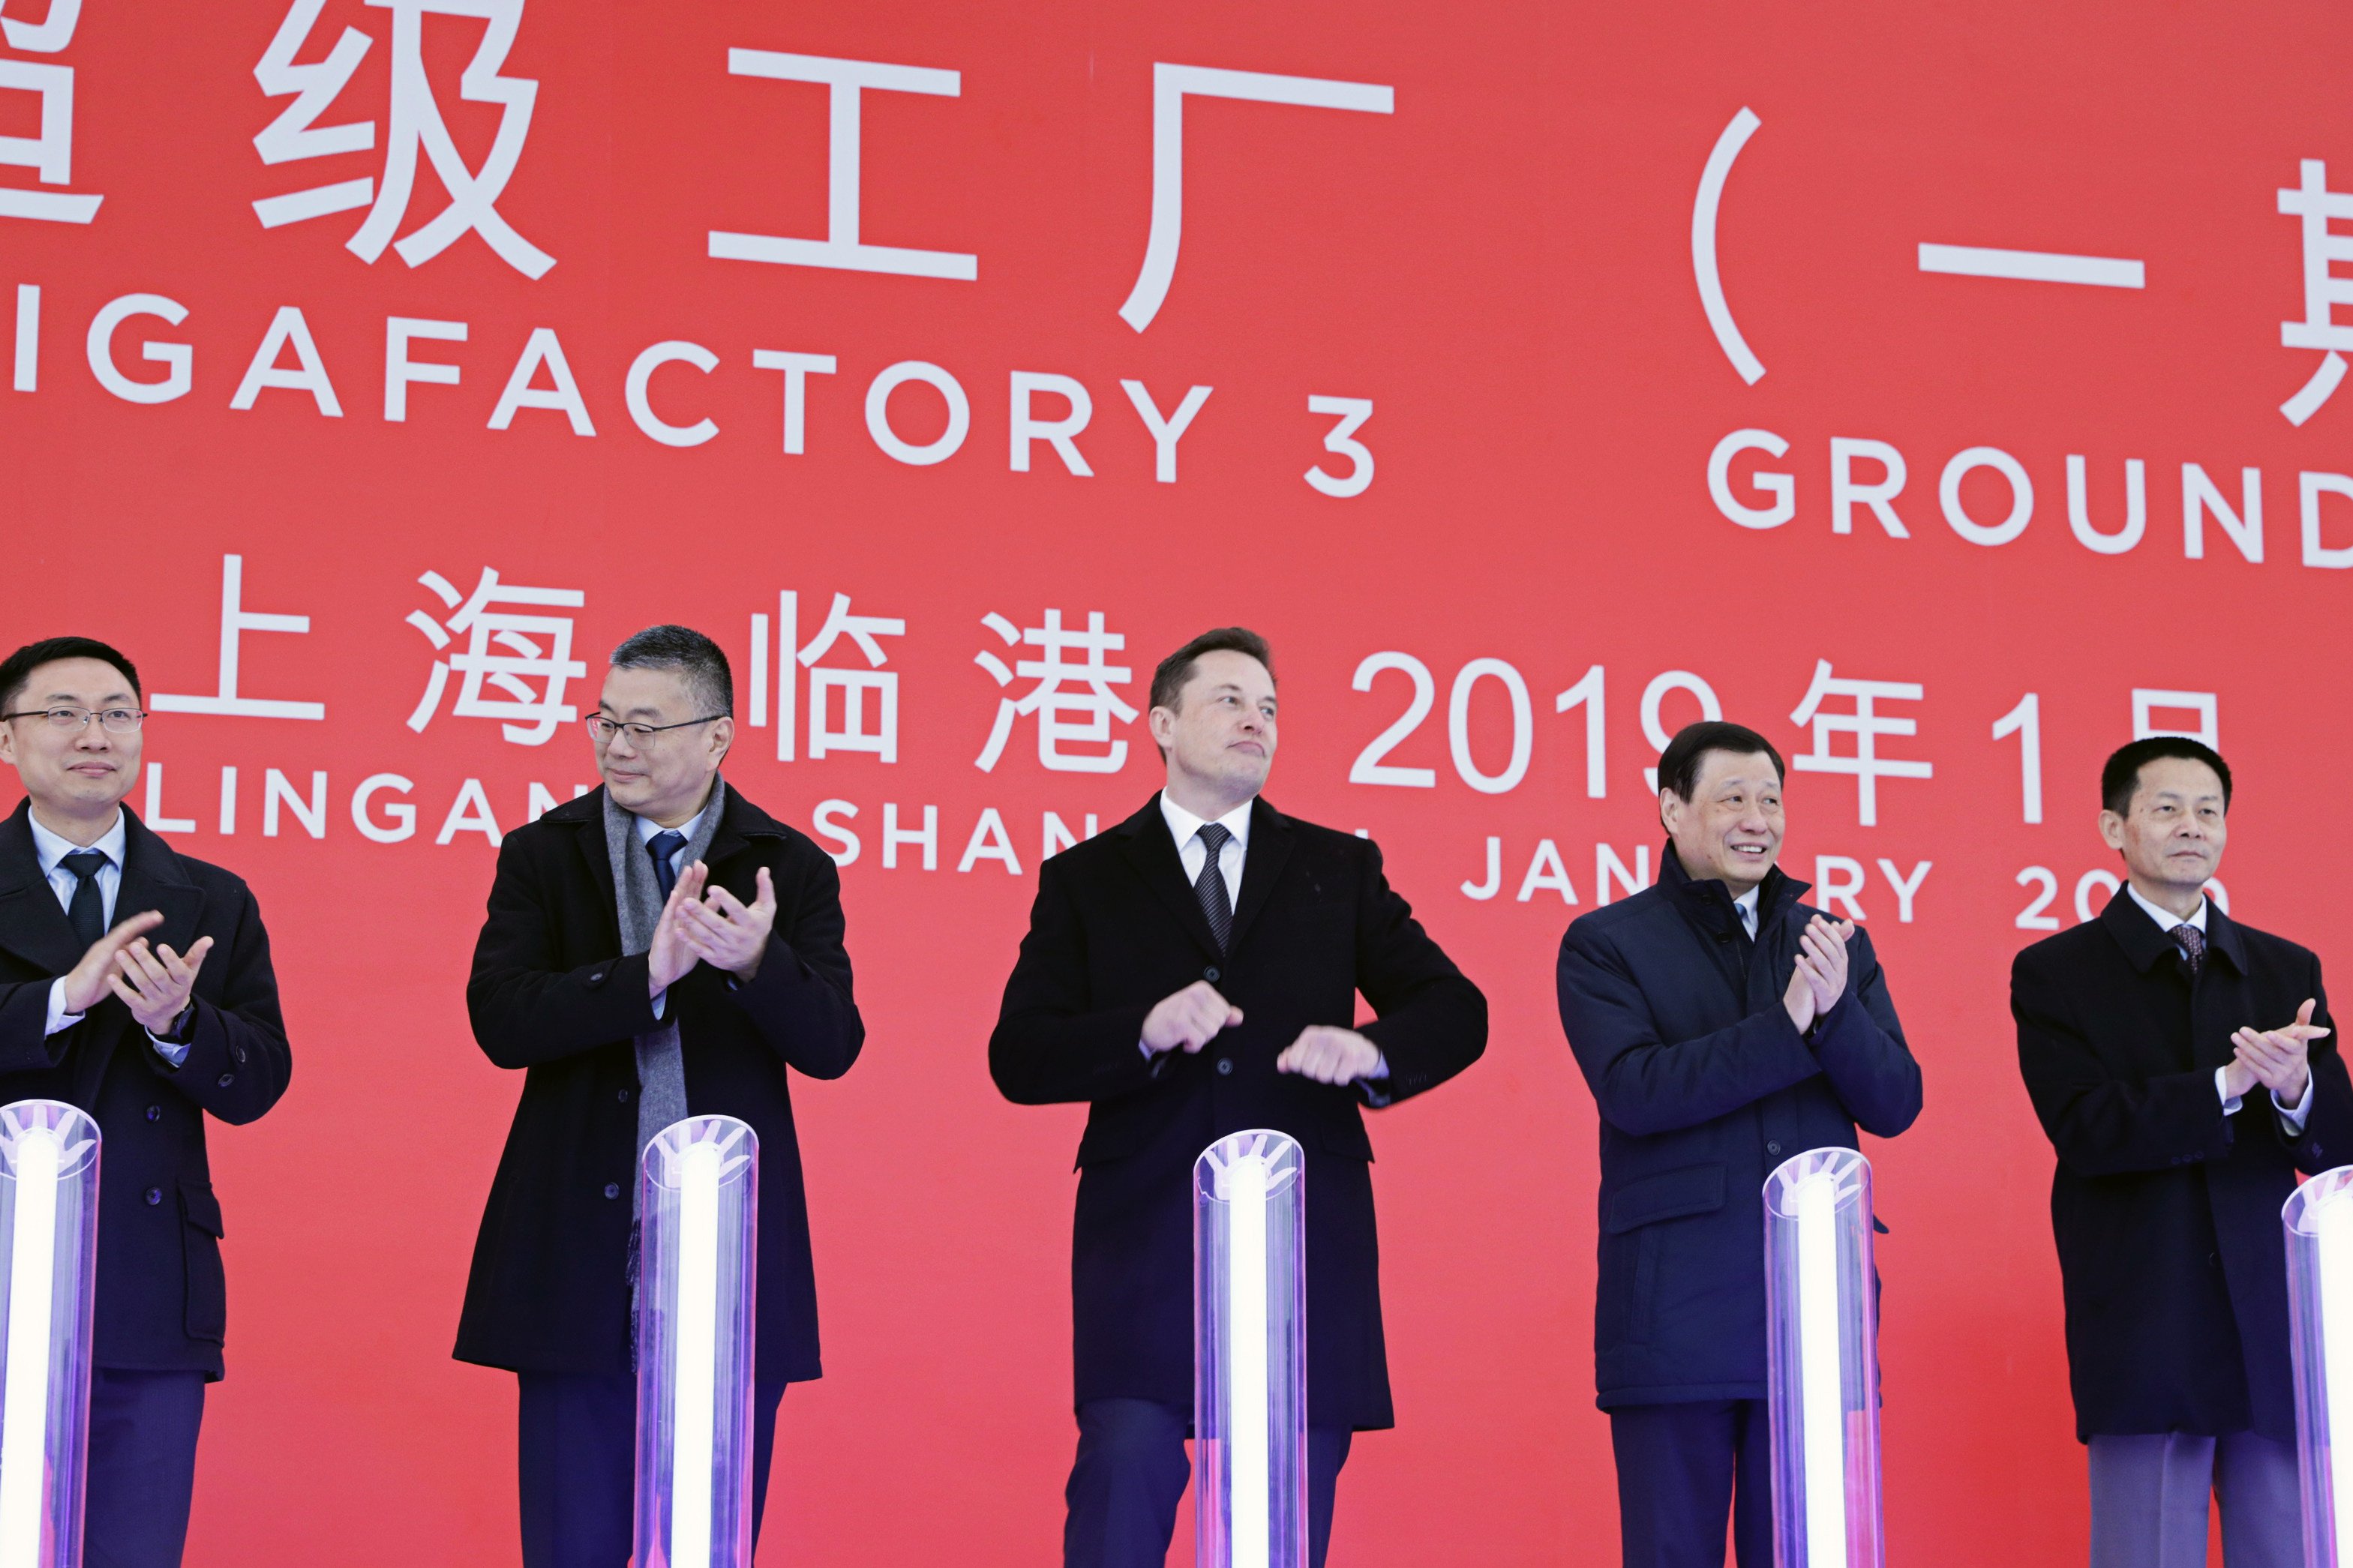 Wu Qing, right, pictured with Elon Musk, centre, has been appointed the new chairman and party secretary for China’s securities regulator. Photo: Bloomberg